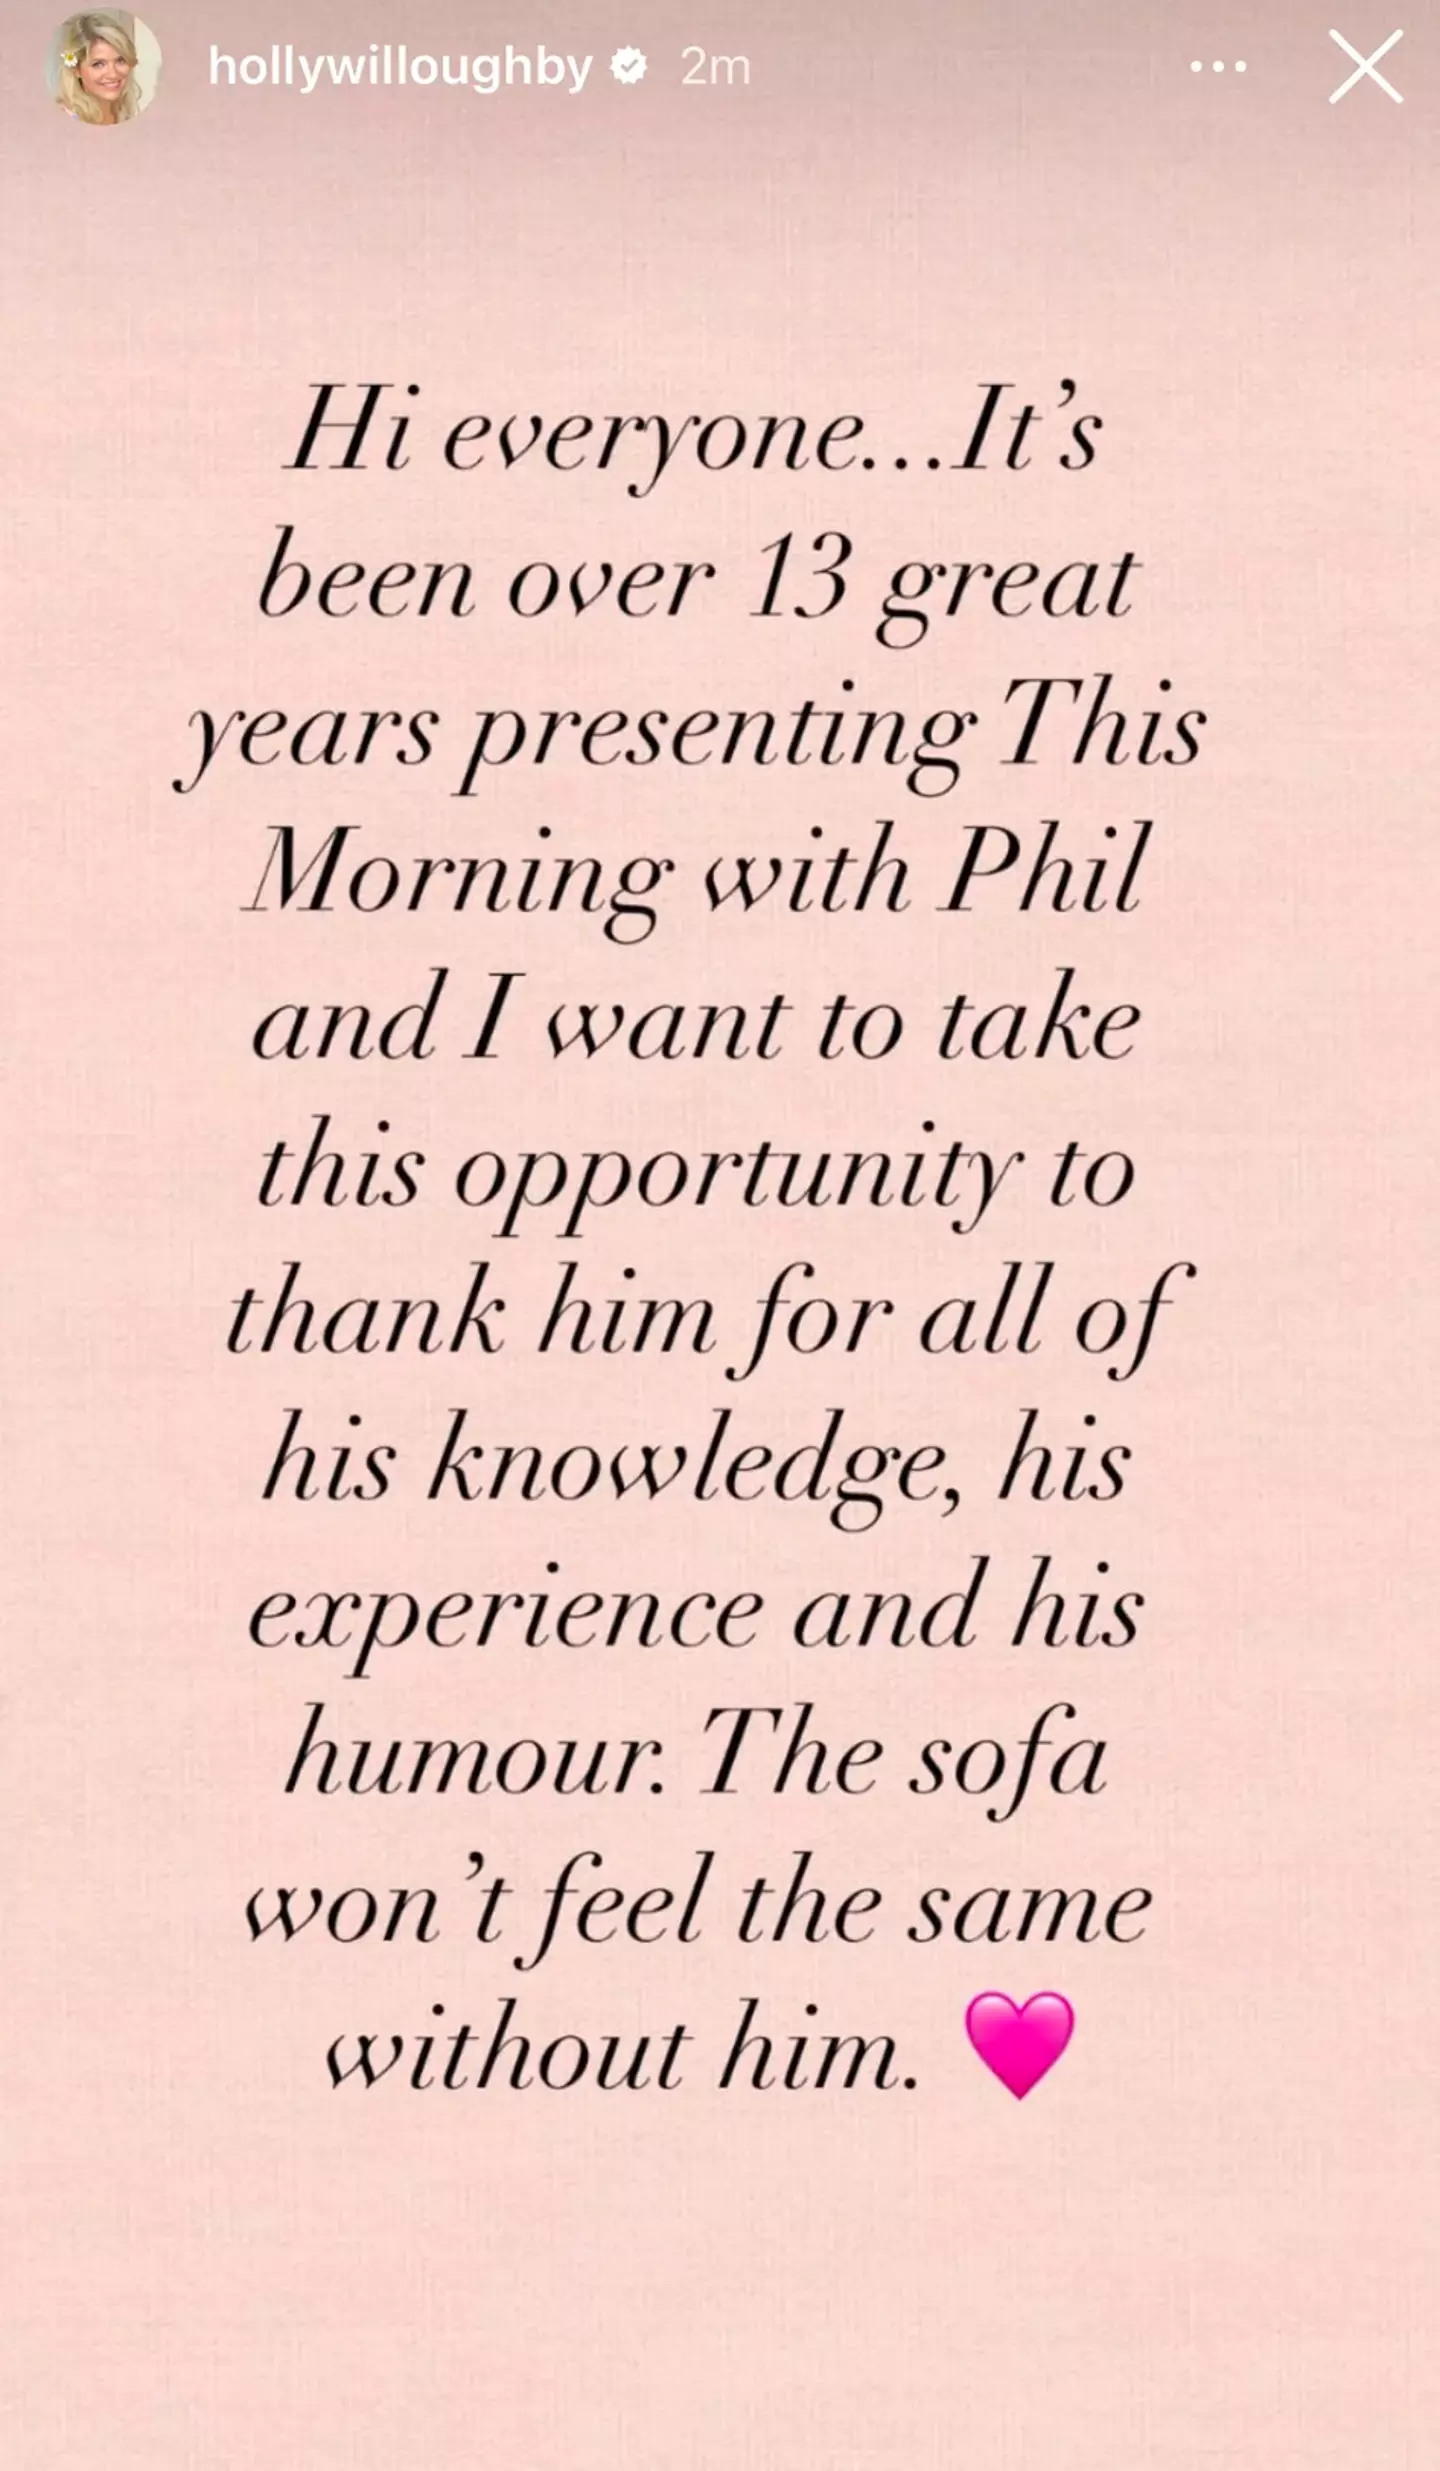 Holly Willoughby has released a statement after Phillip Schofield quits This Morning.